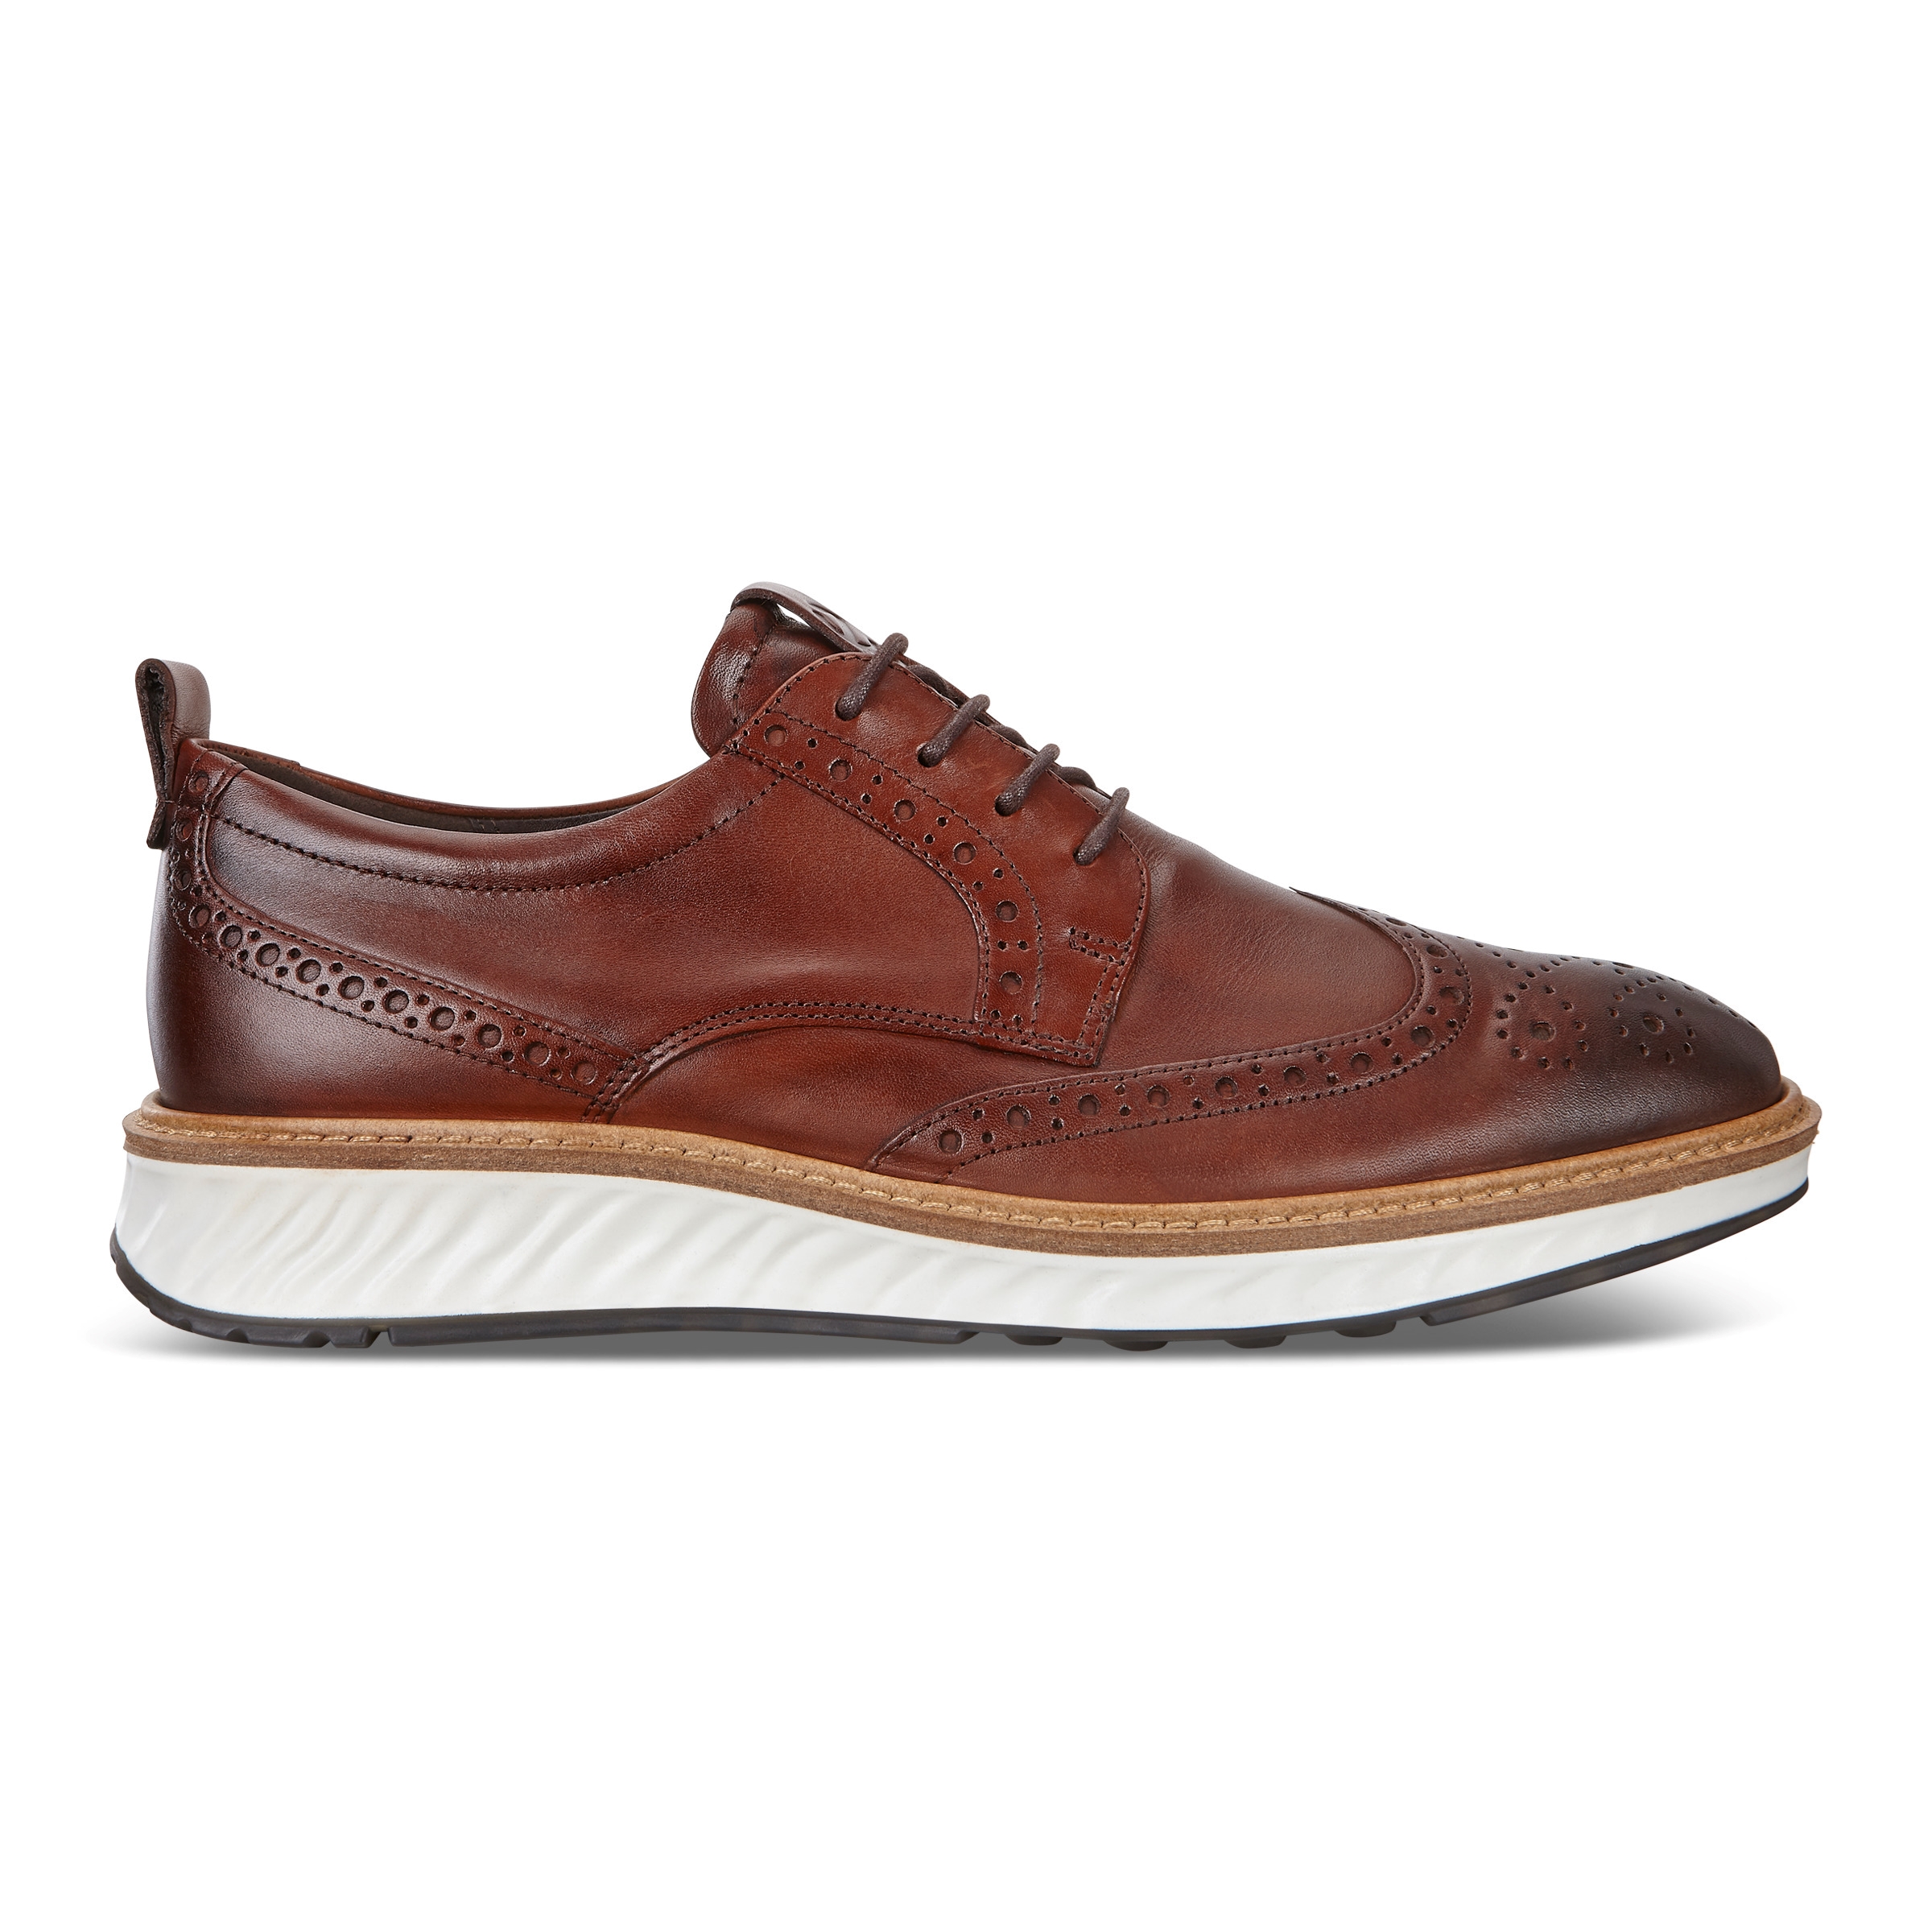 SHOES BUSINESS ECCO ST.1 HYBRID